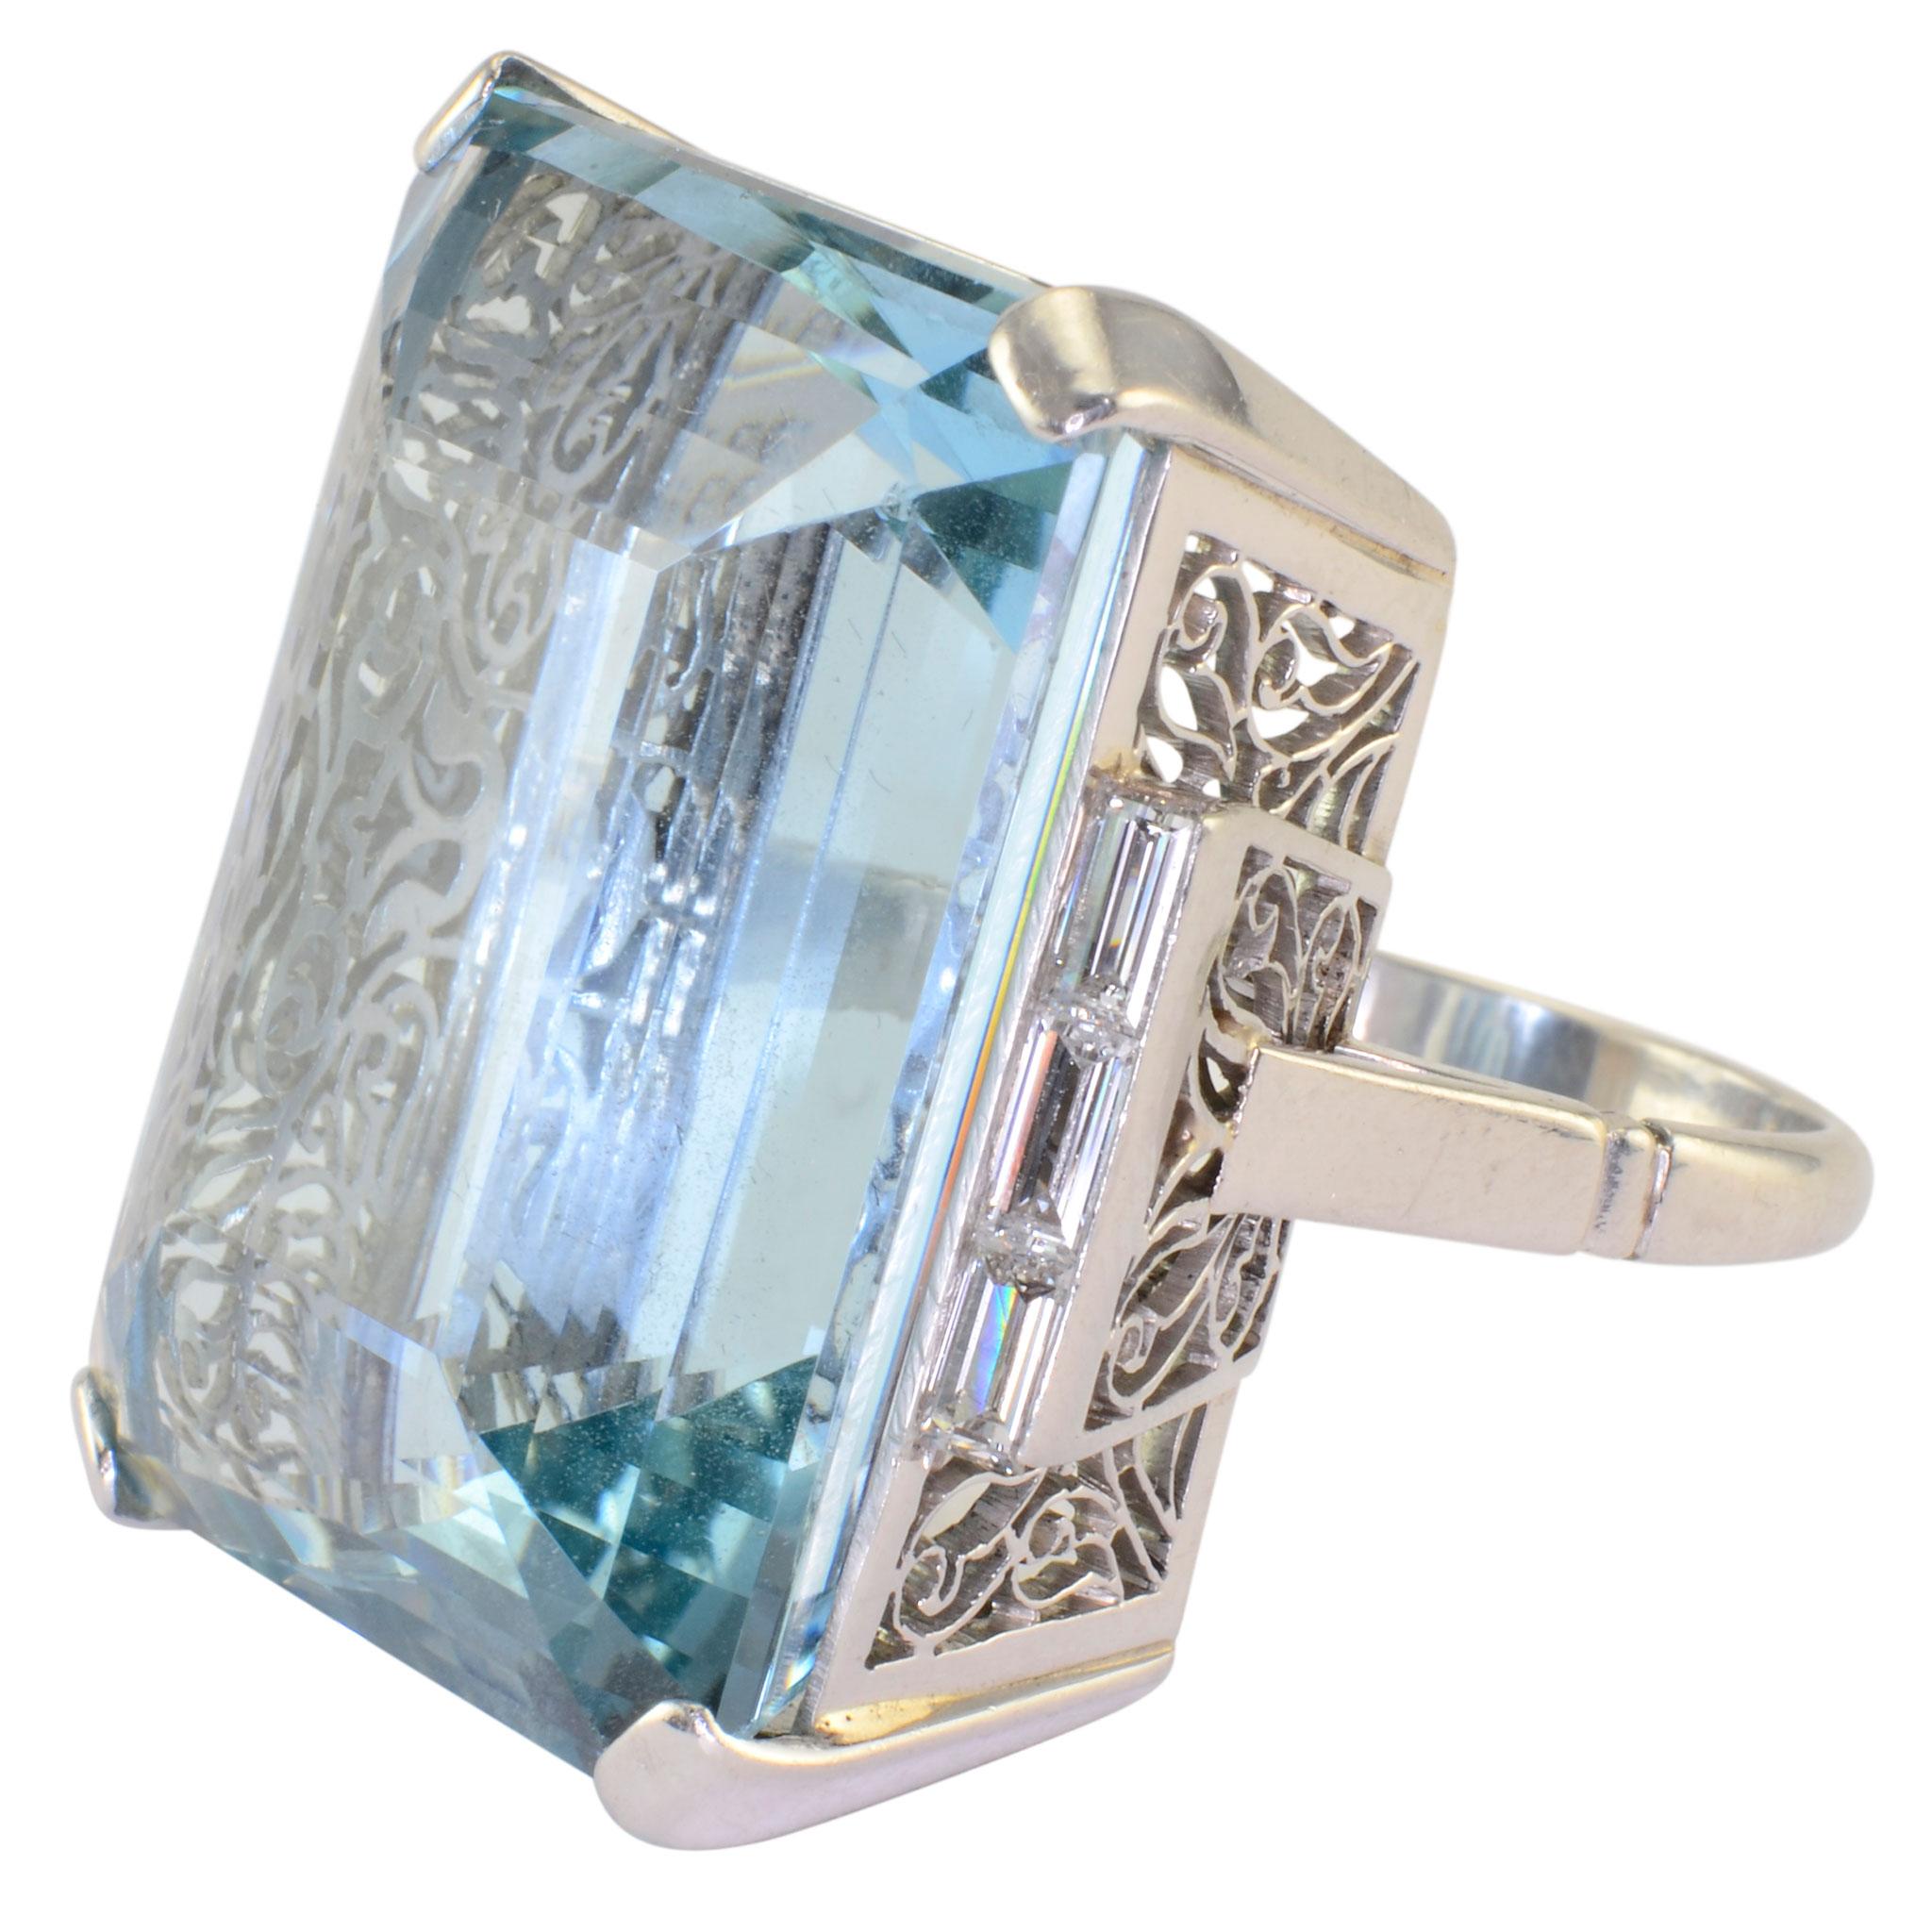 Vintage 46.88 carat aquamarine and diamond platinum ring, circa 1960. This vintage ring has an emerald cut aquamarine at 46.88 carats and six baguette diamonds at 0.50 carat total weight VS1 clarity F-G clarity set in a pierced gallery. The vintage